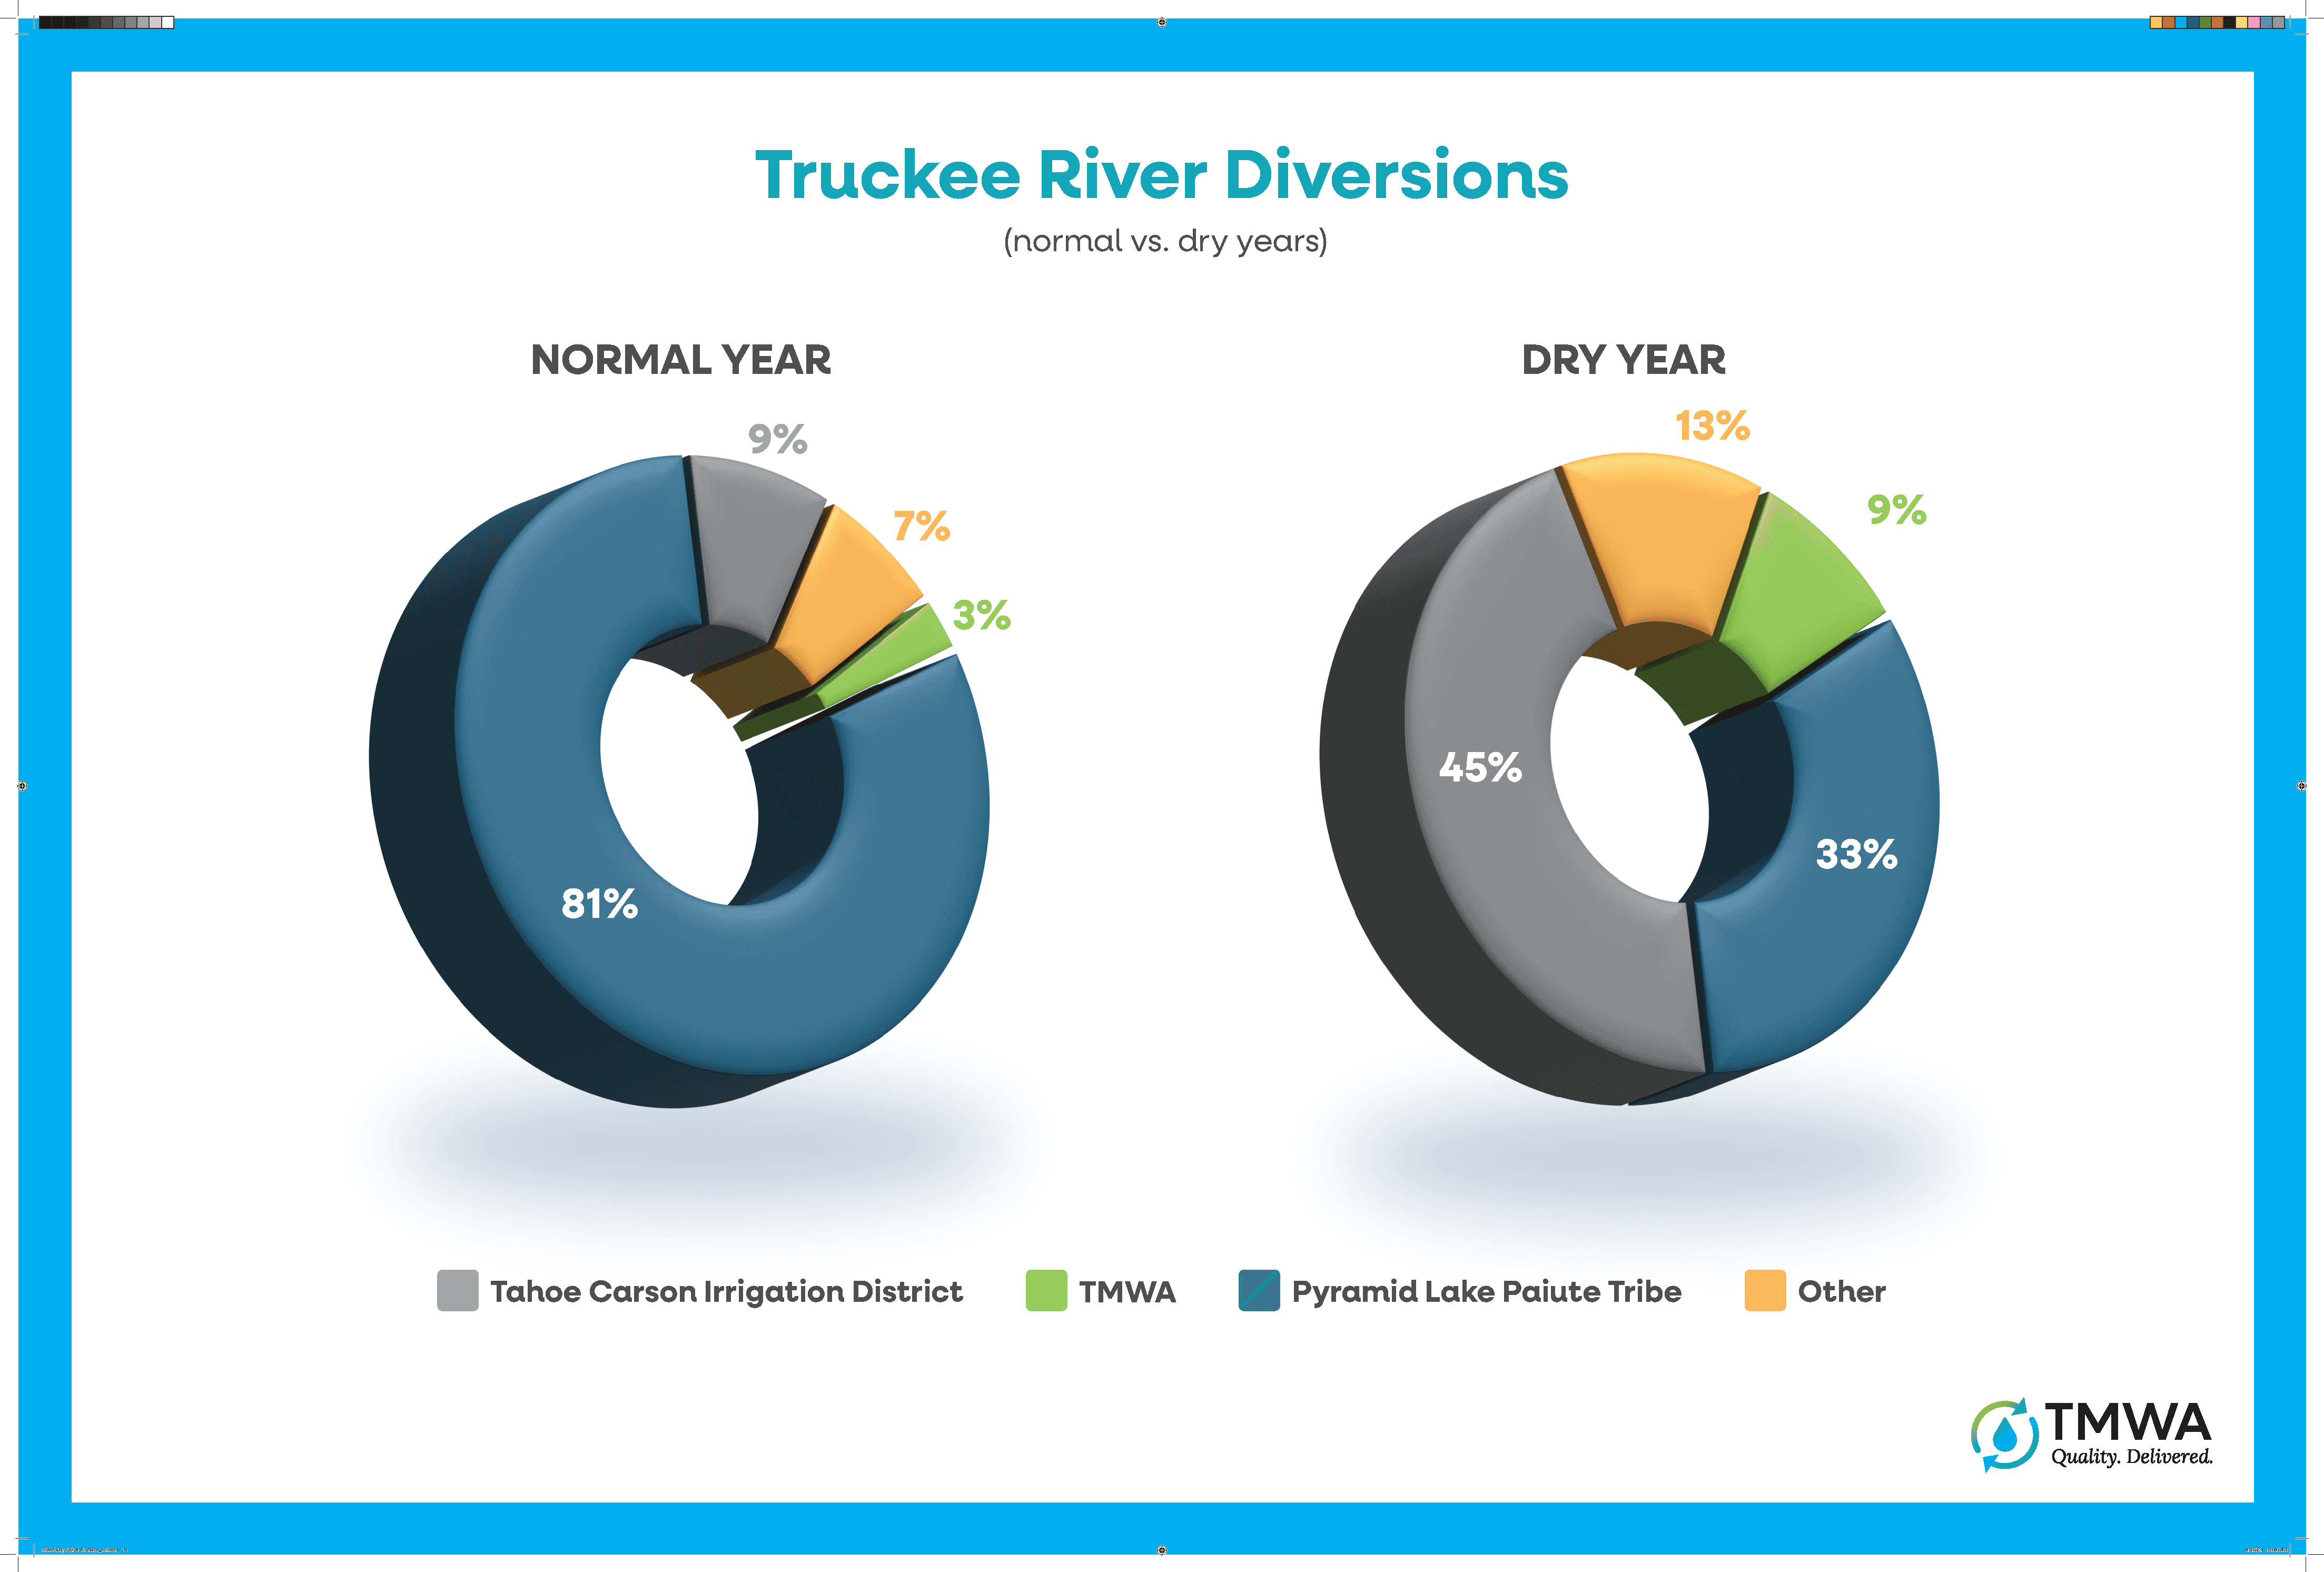 Truckee River Diversions by Group (Wet/Dry Year Comparison) 